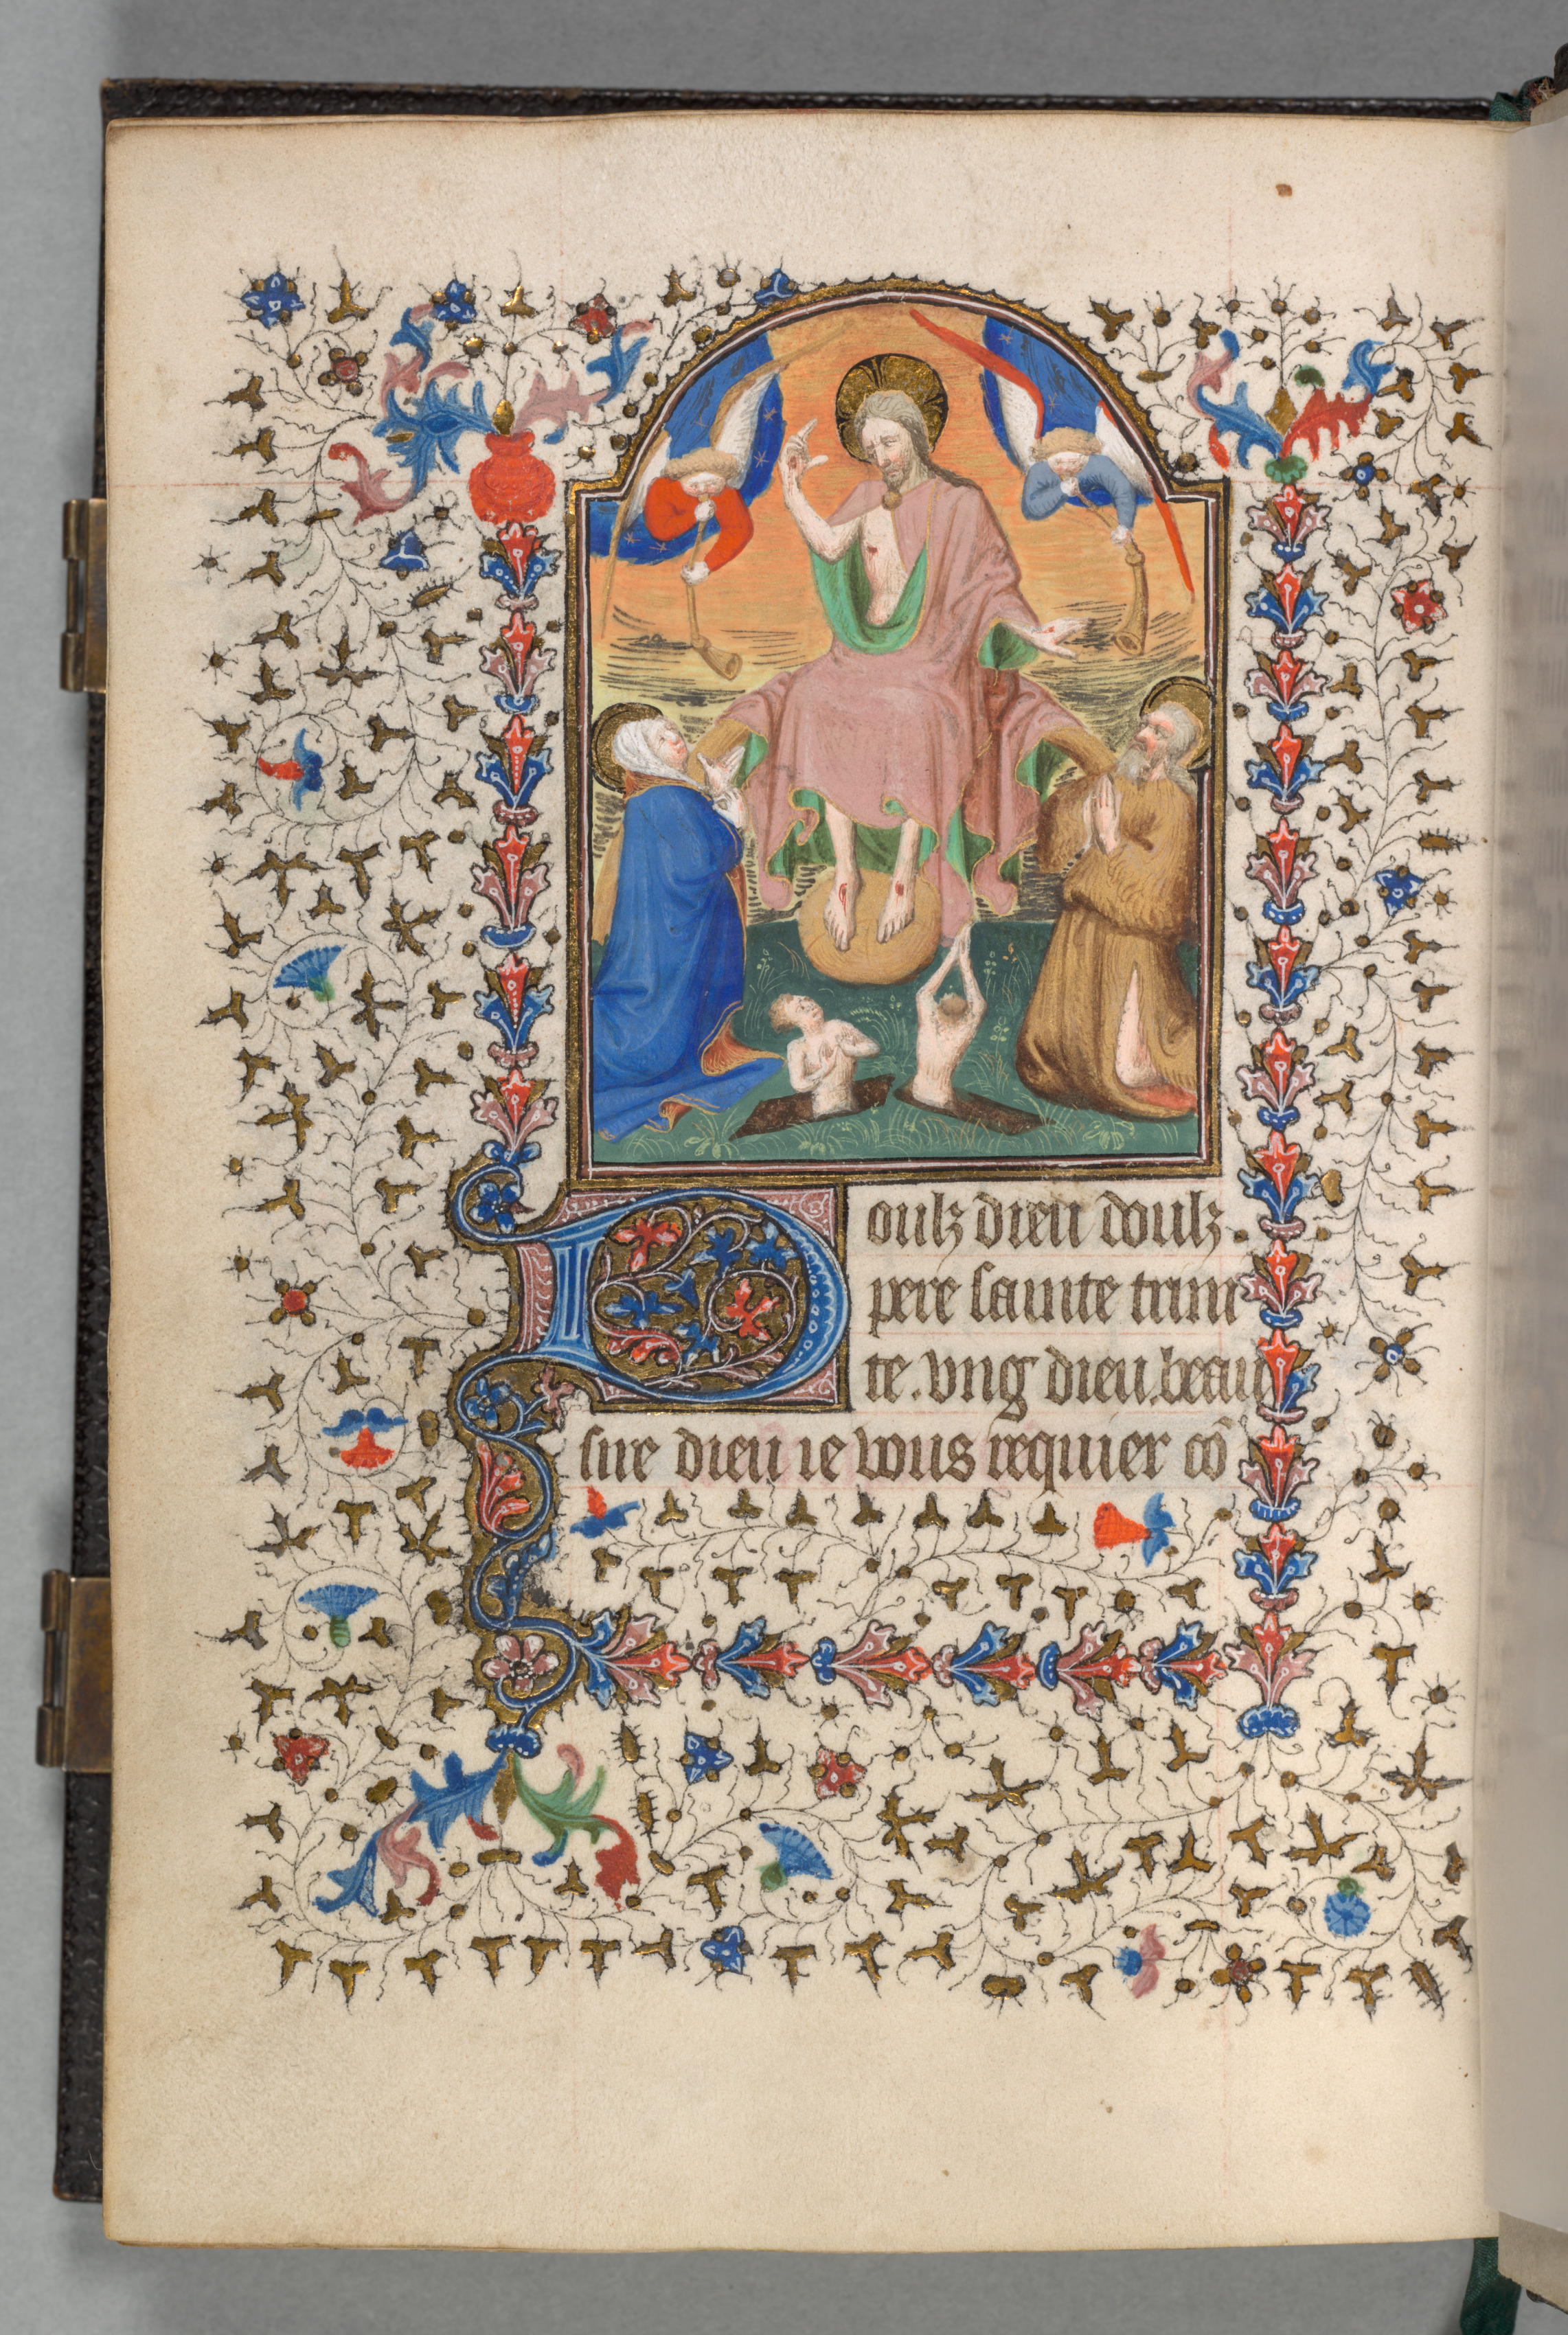 Book of Hours (Use of Paris): Fol. 204v, Last Judgment